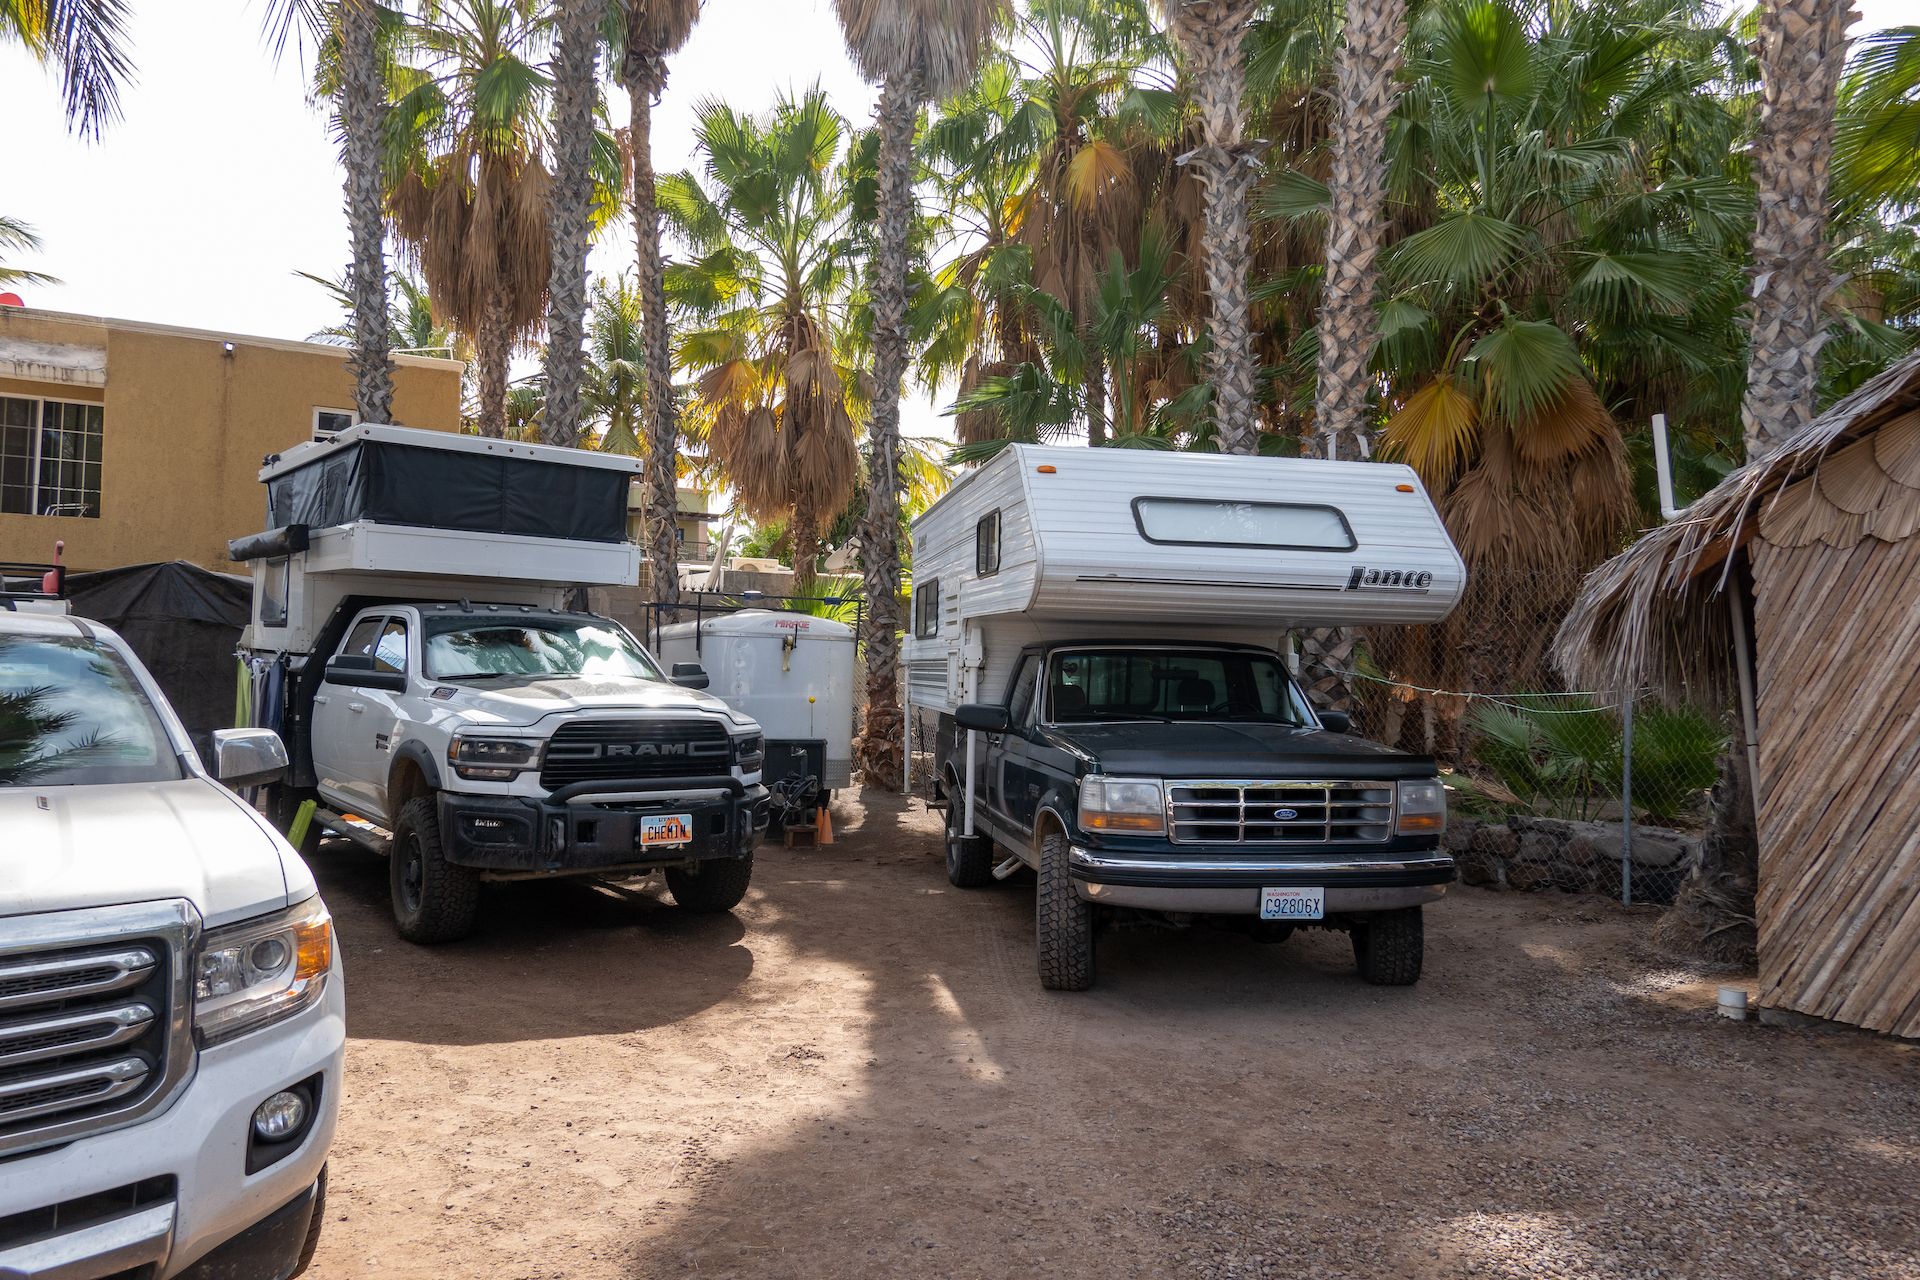 Our truck next to Will and Beth’s Ford at the campground in Loreto